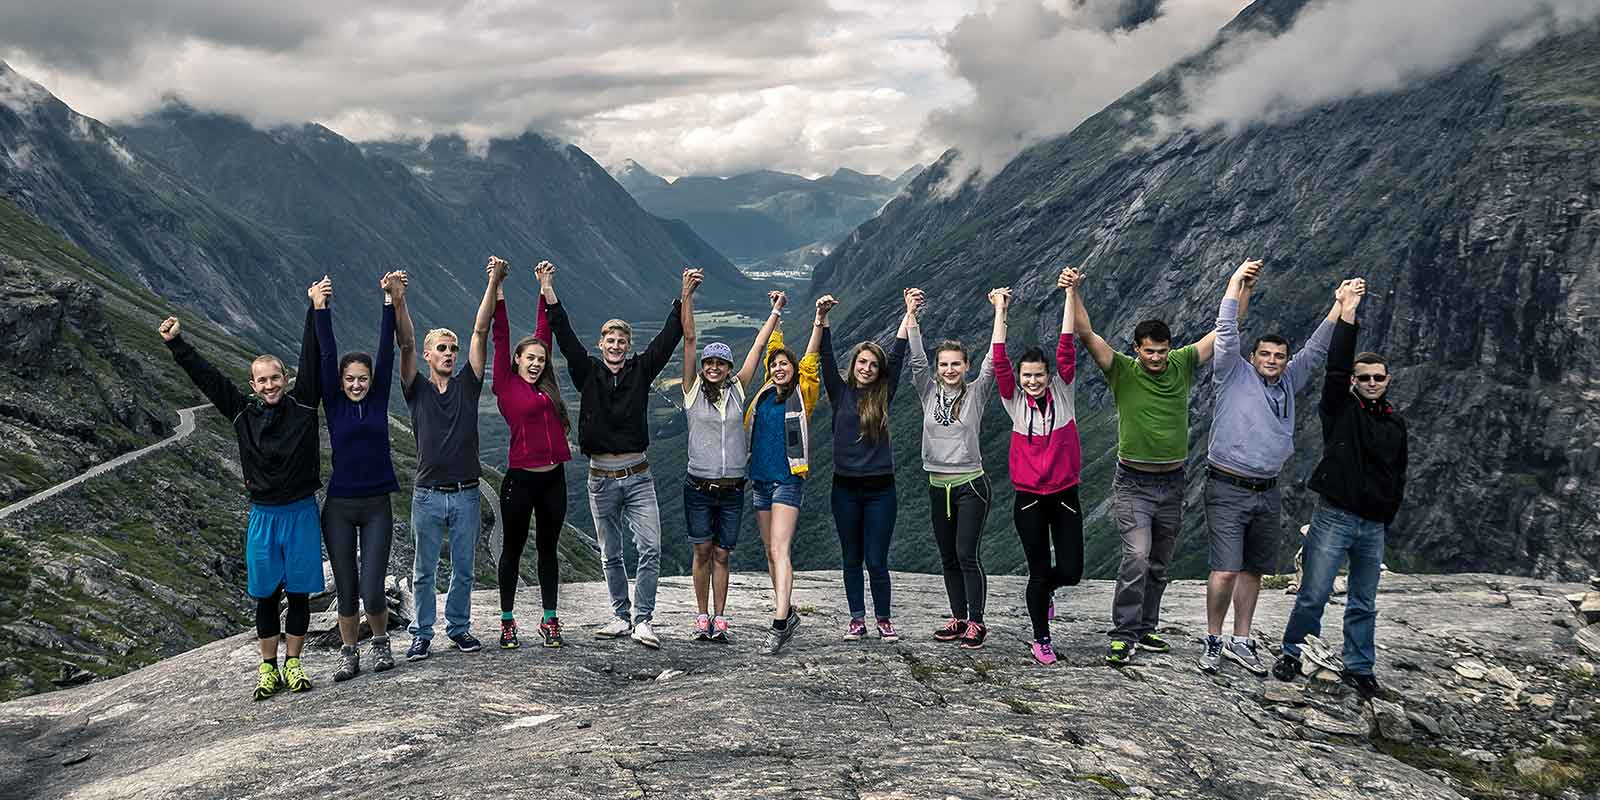 Group of young people joining hands in celebration in front of mountain range